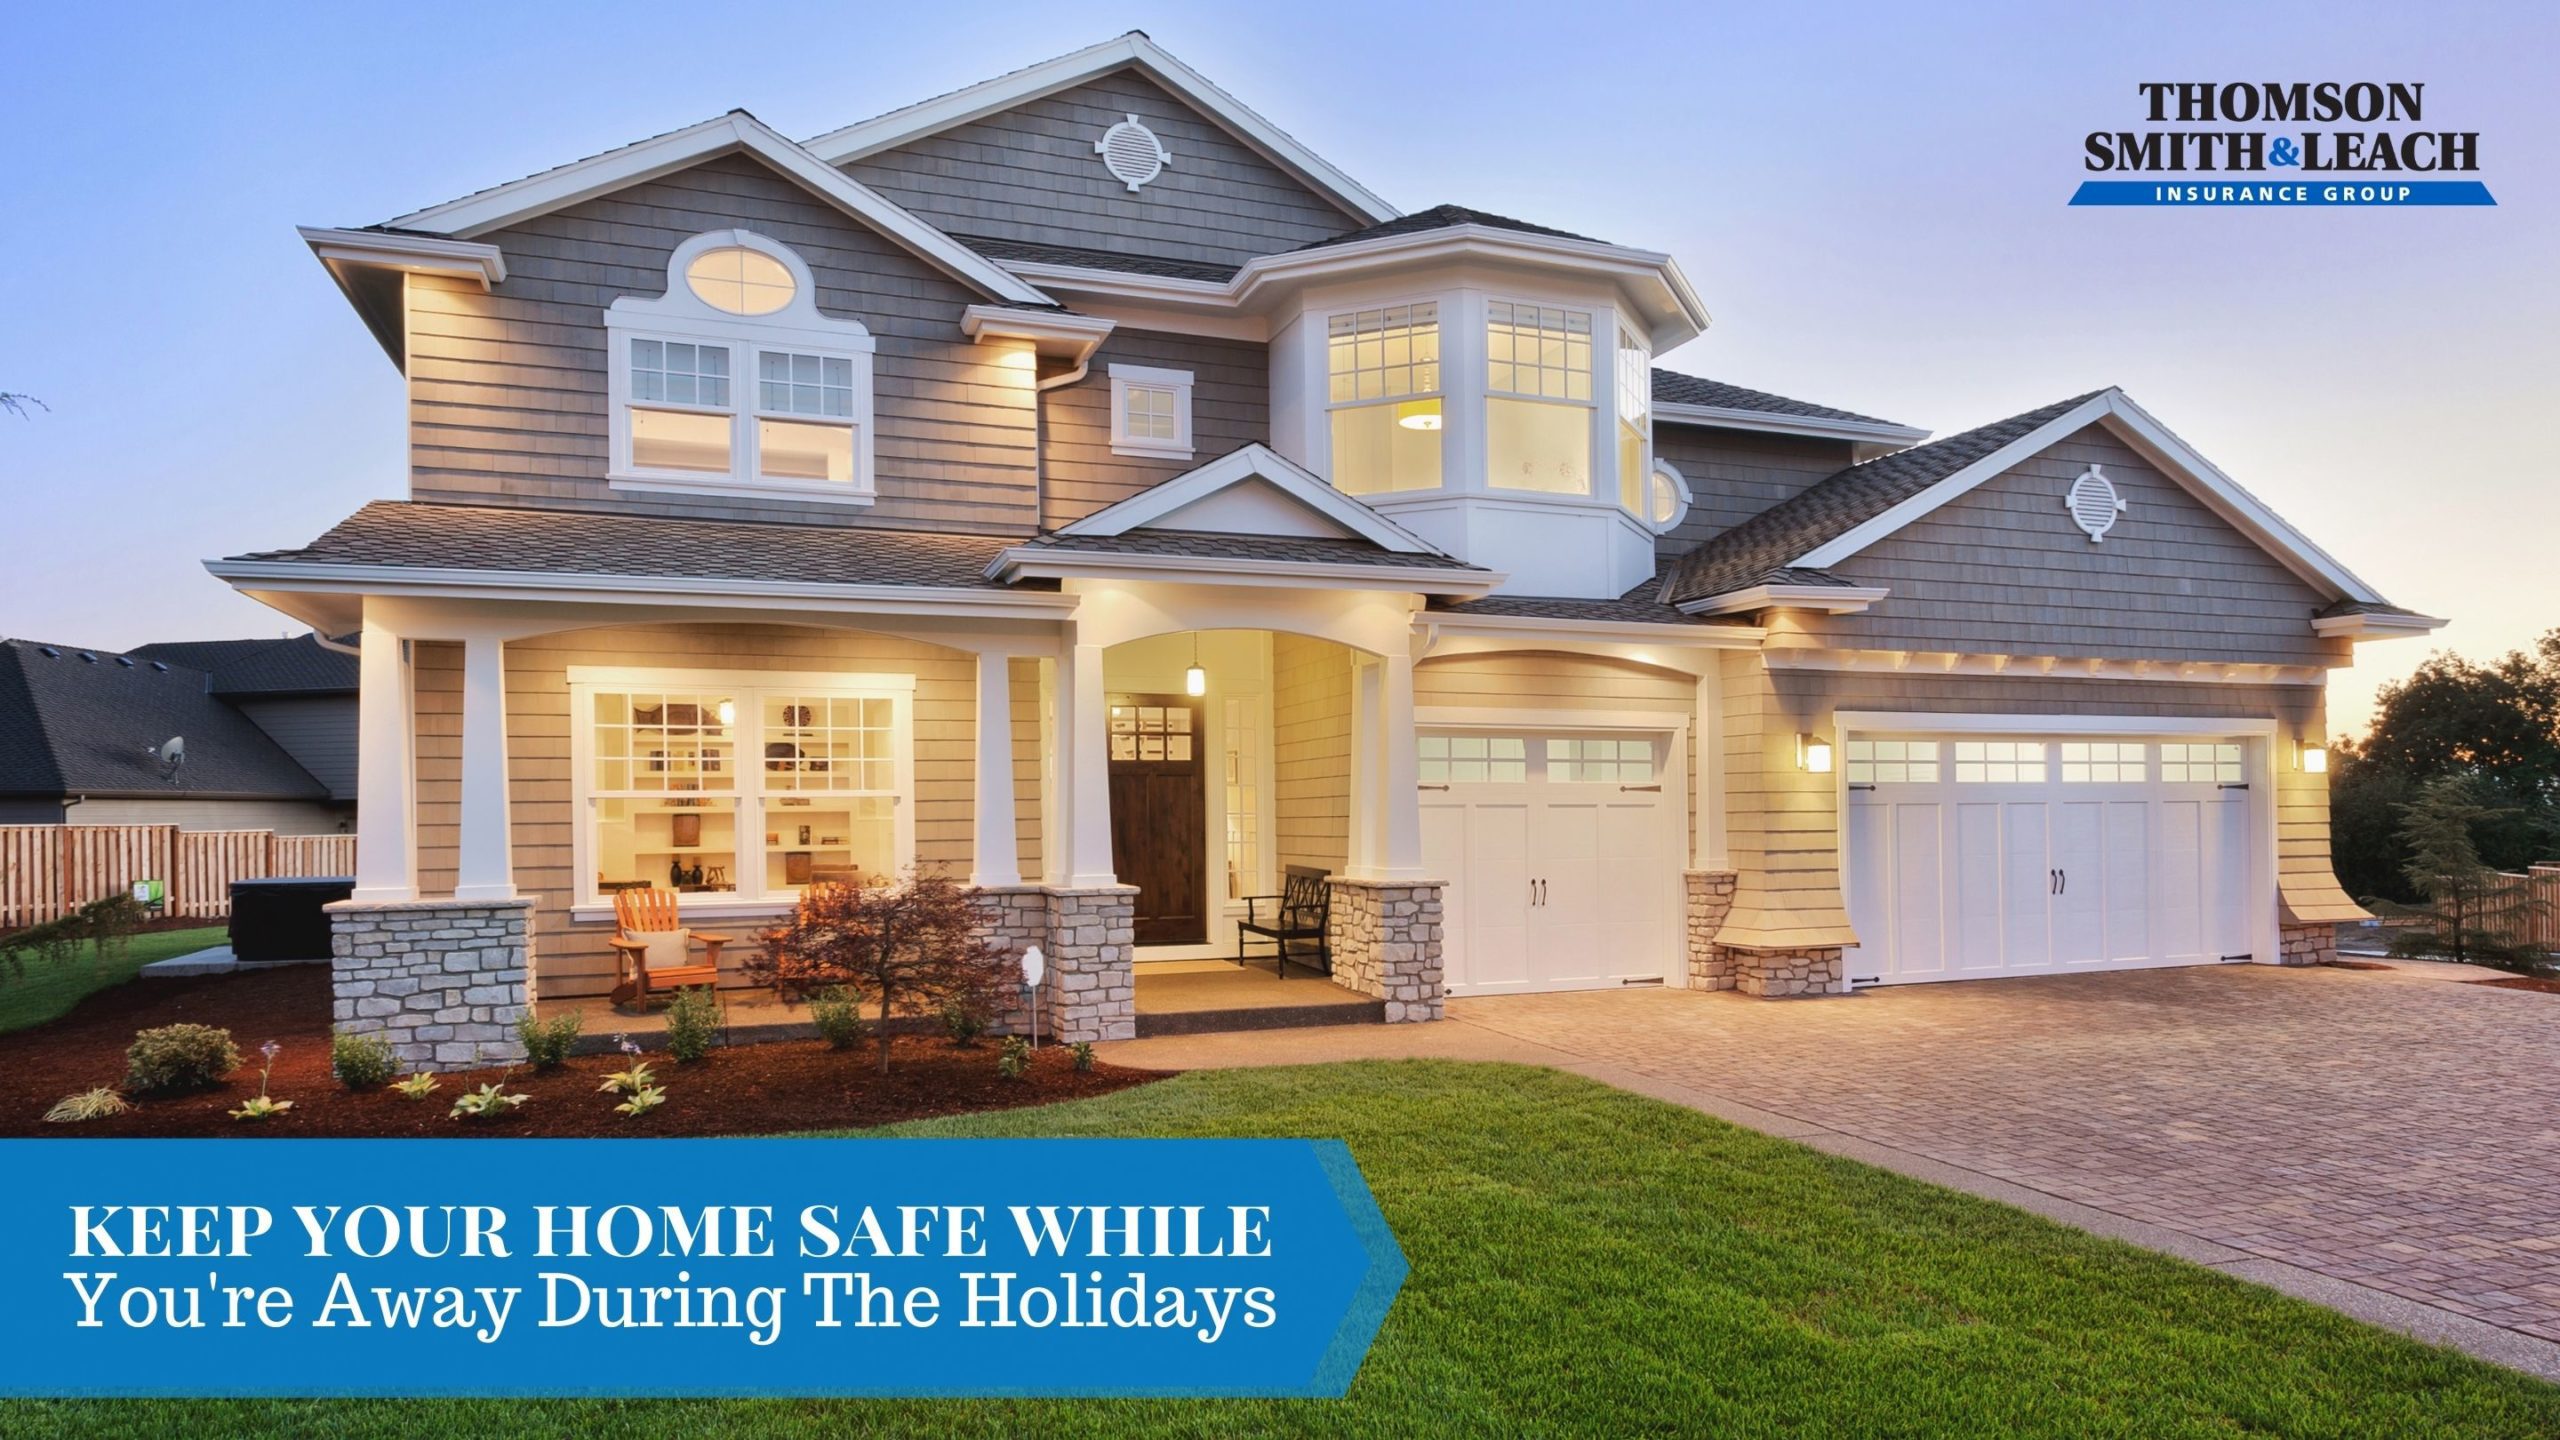 Ways to Keep Your Home Safe While You're Away This Holiday